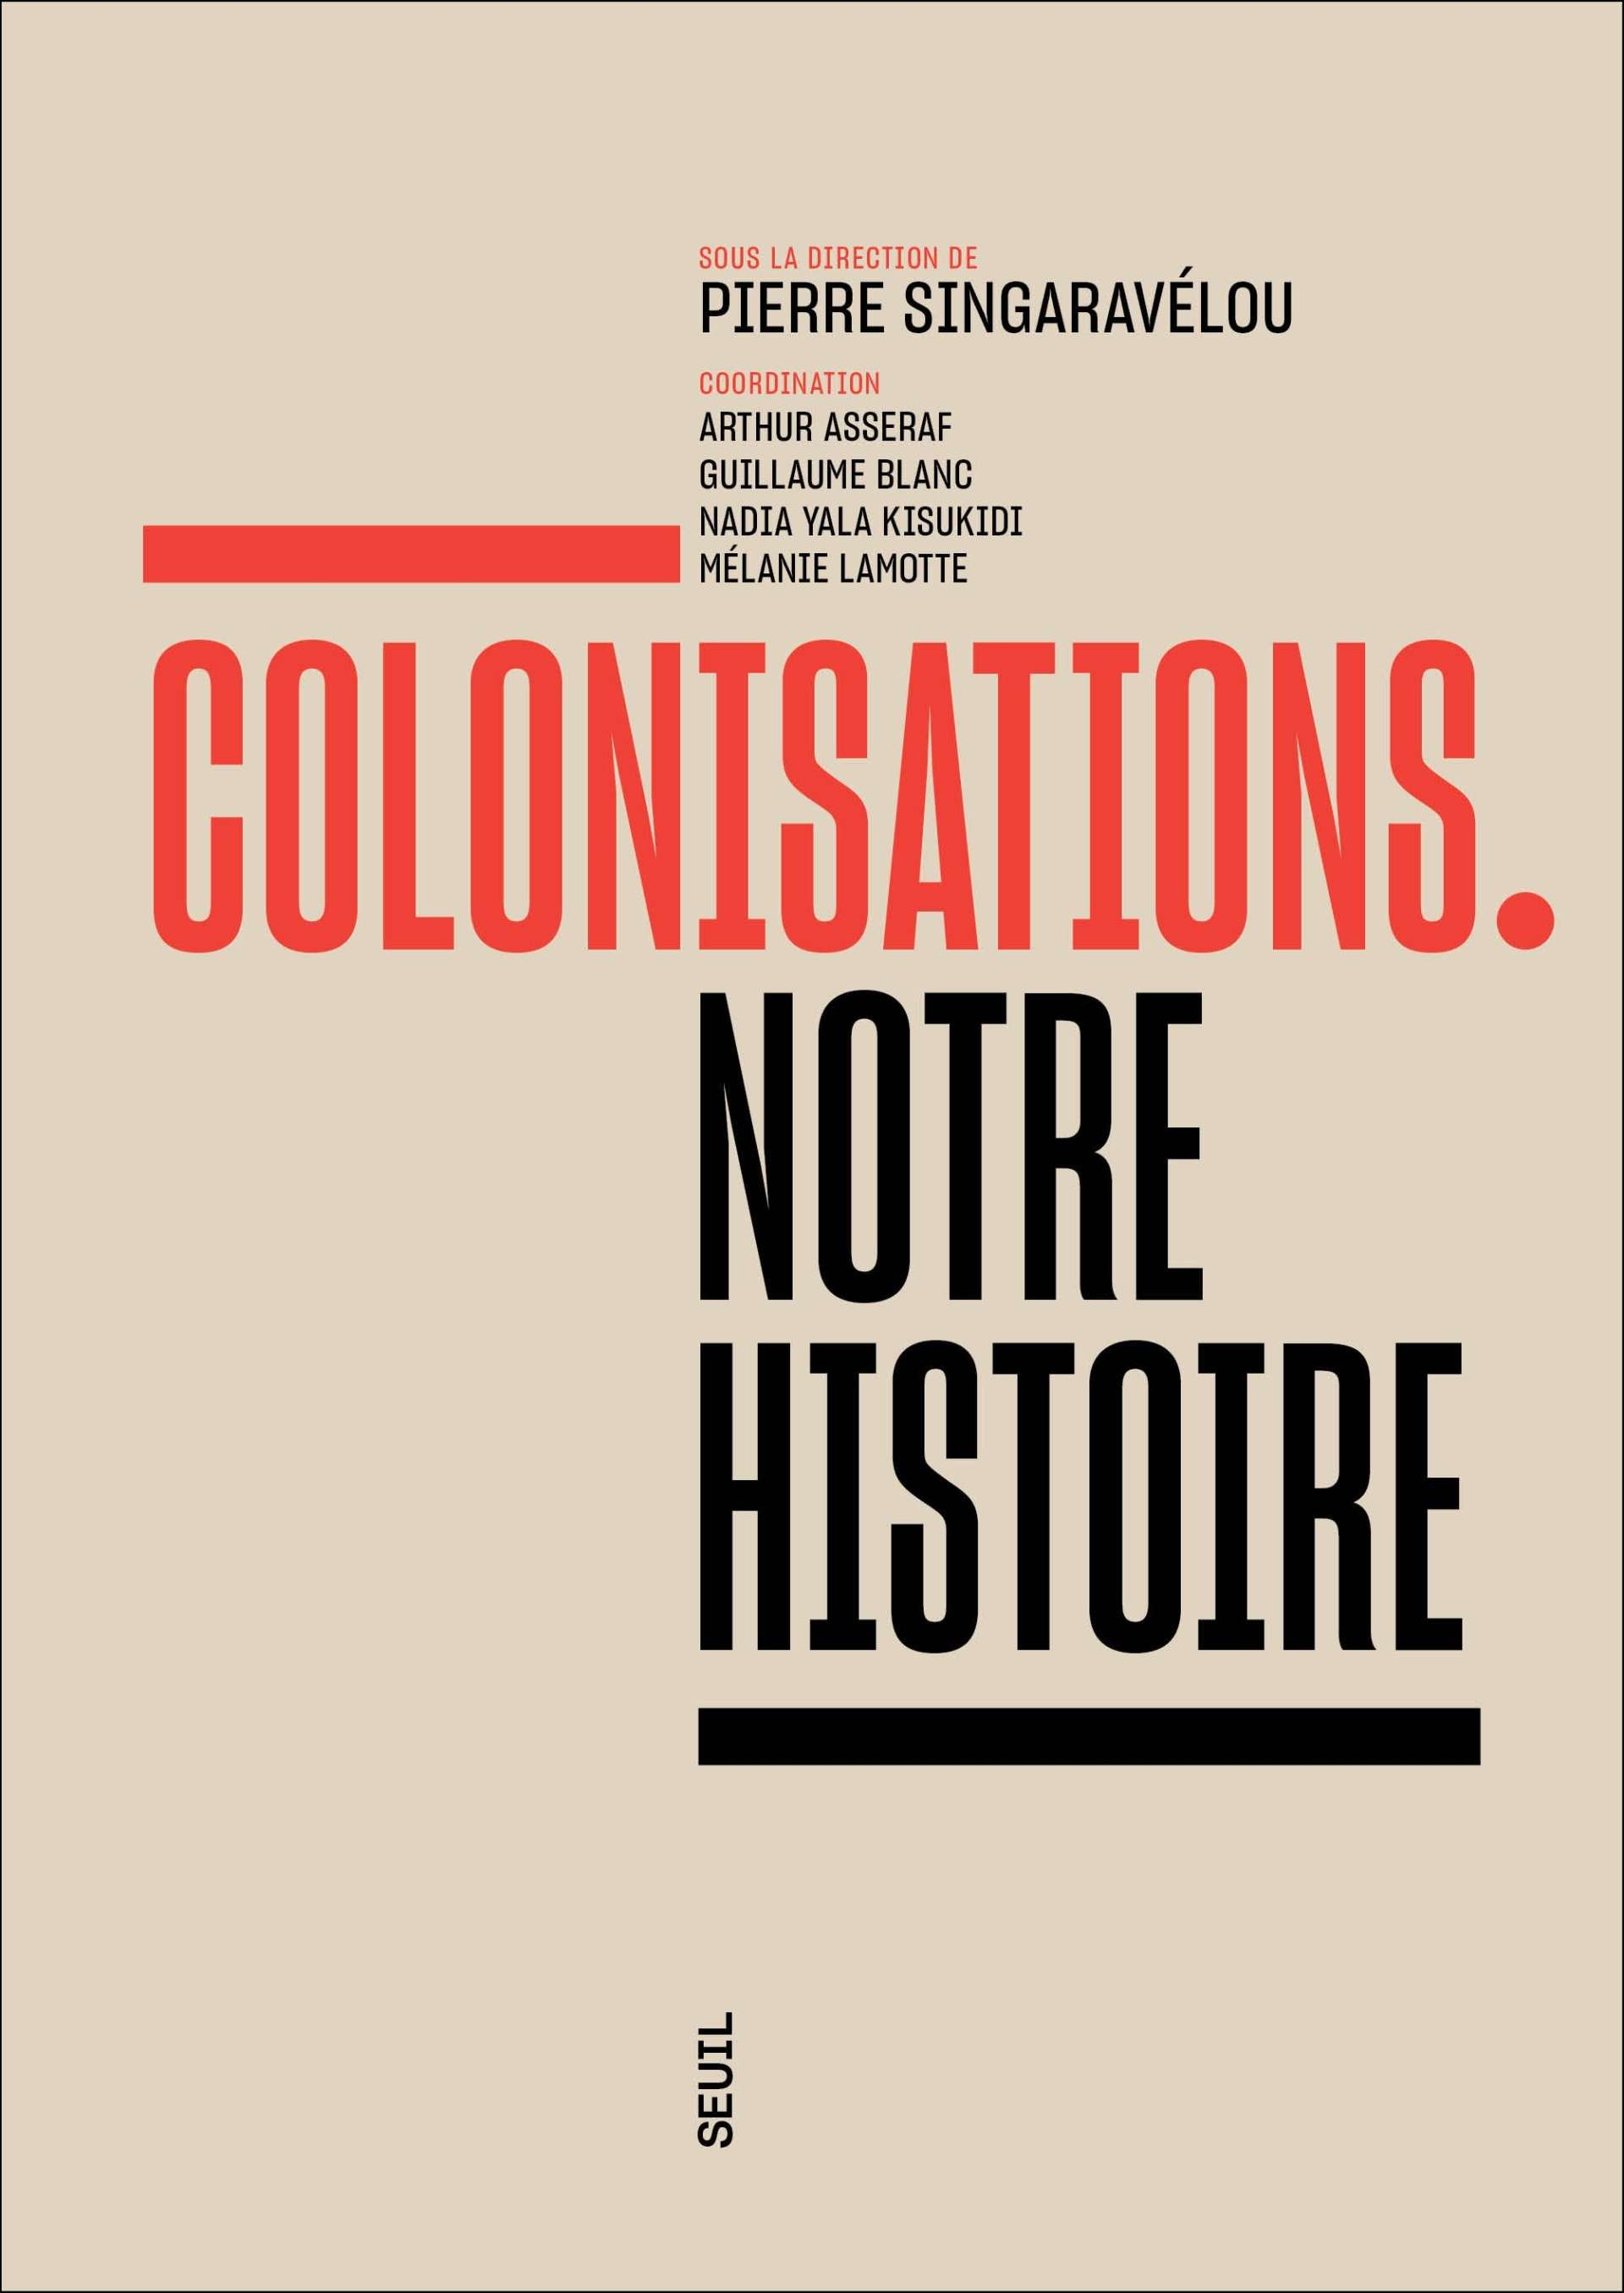 Colonisations_Notre_histoire_Couv_HD.jpg